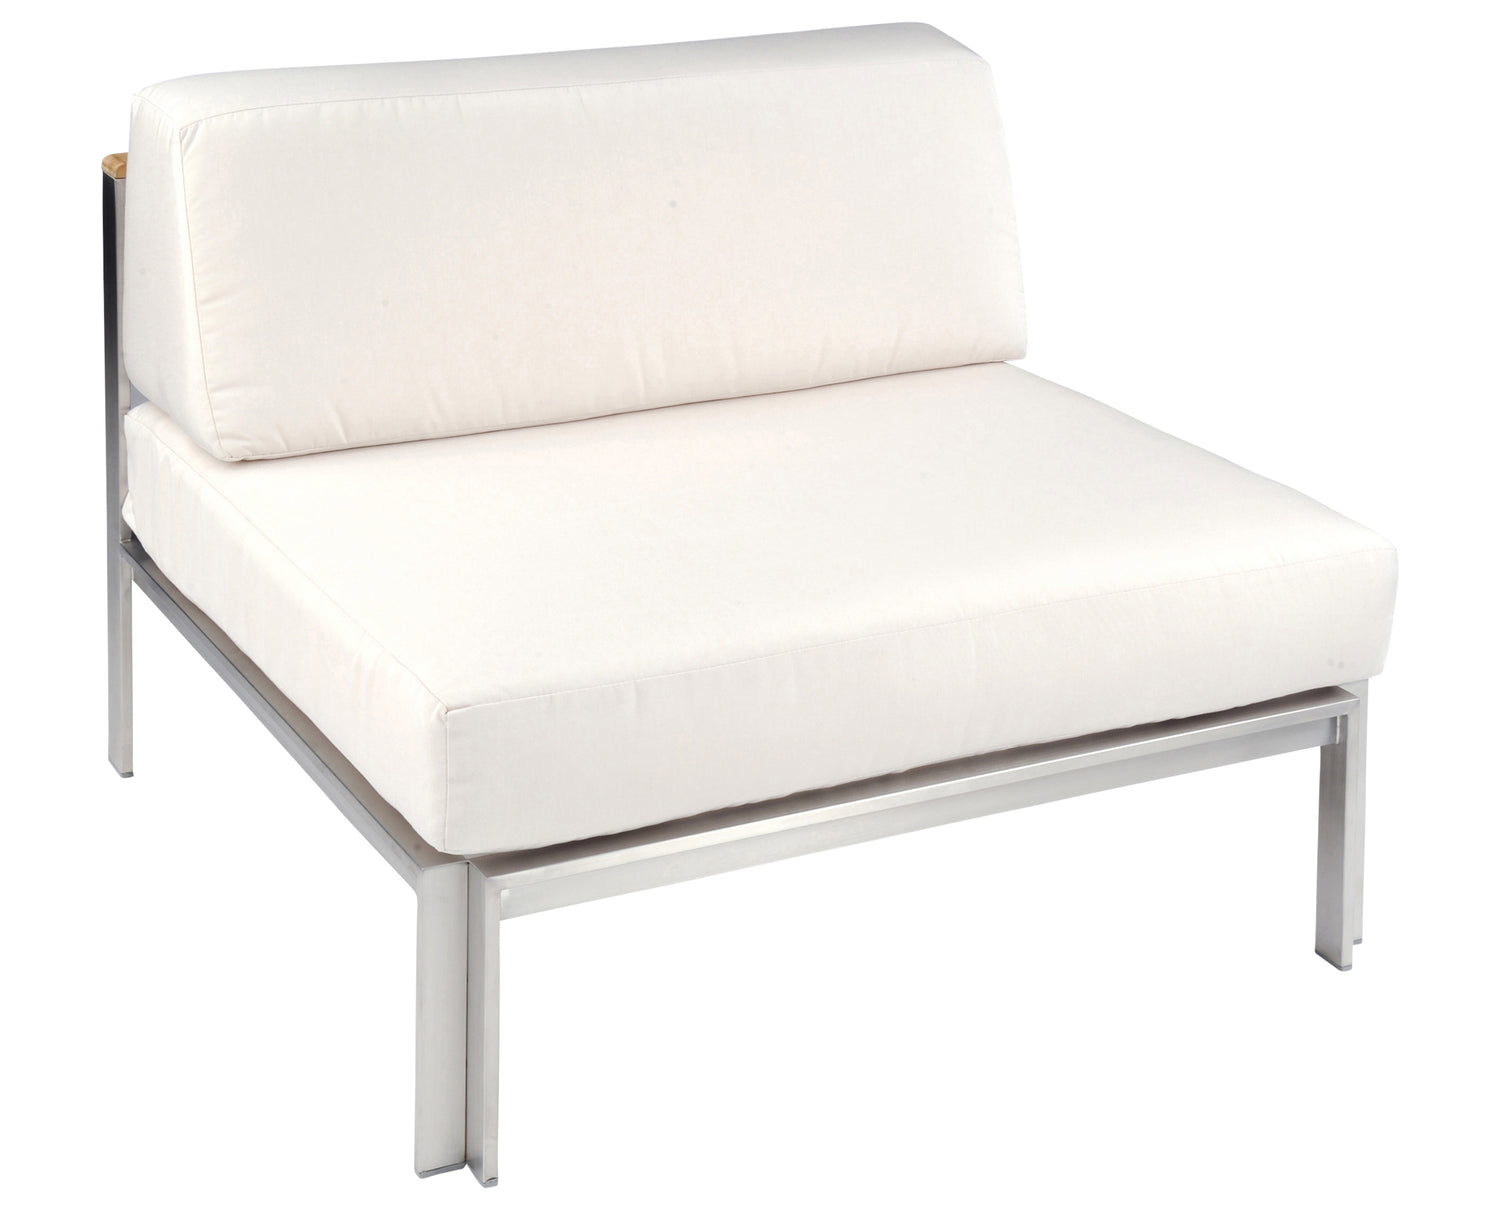 Sectional Armless Chair | Kingsley Bate Tivoli Collection | Valley Ridge Furniture